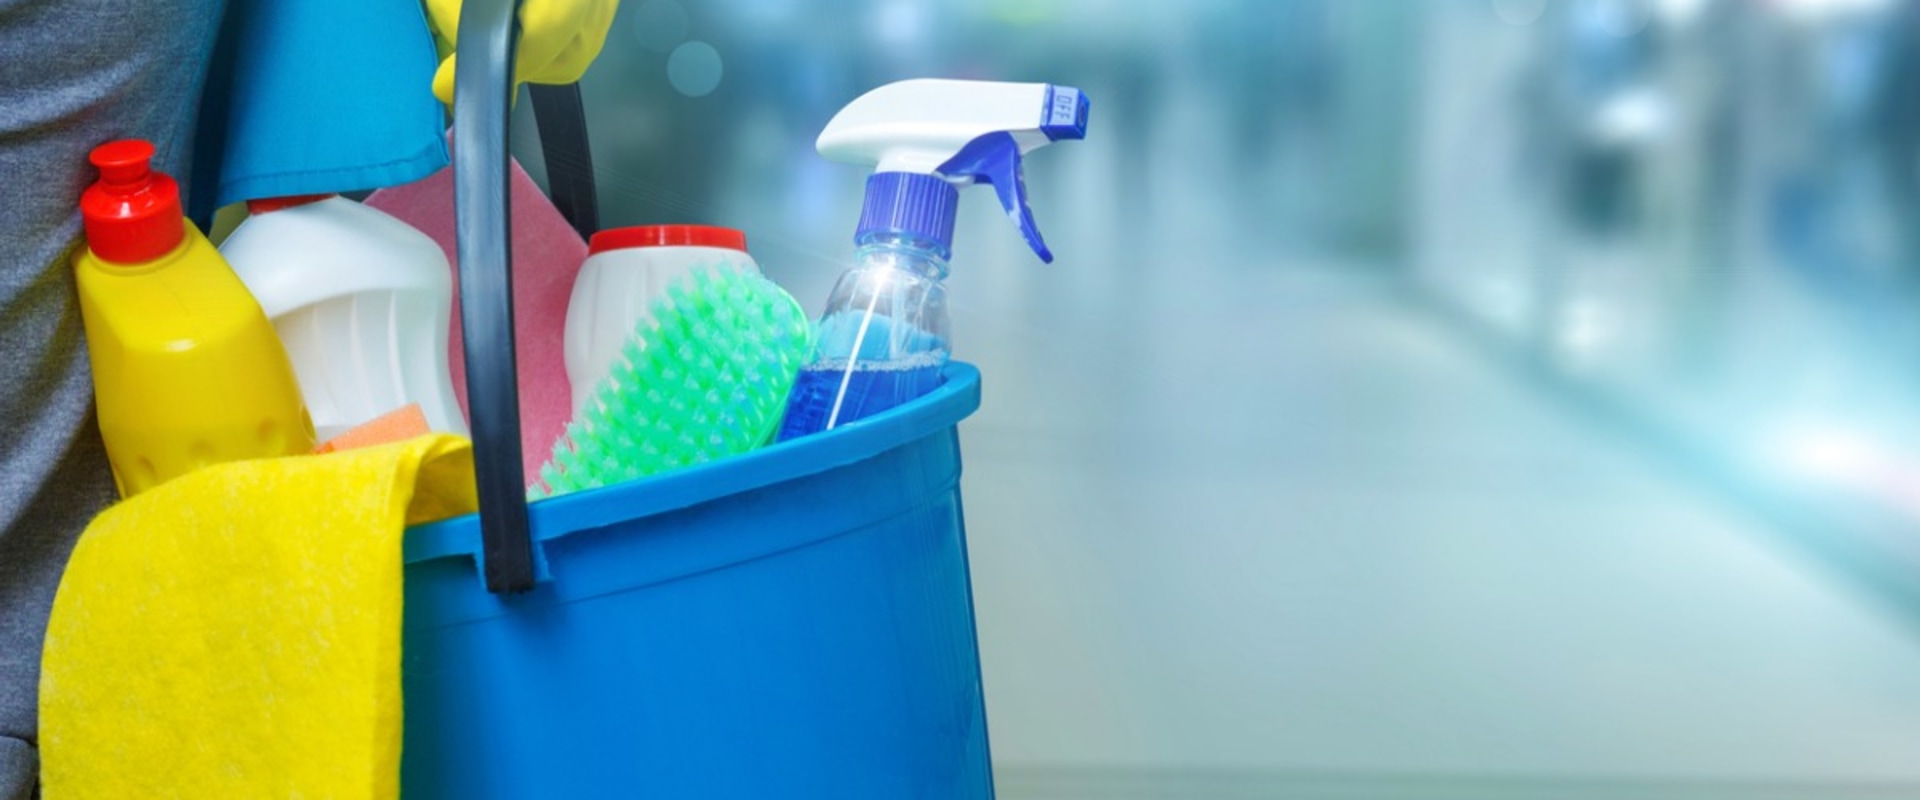 Do Professional Cleaners Bring Their Own Supplies? - An Expert's Perspective